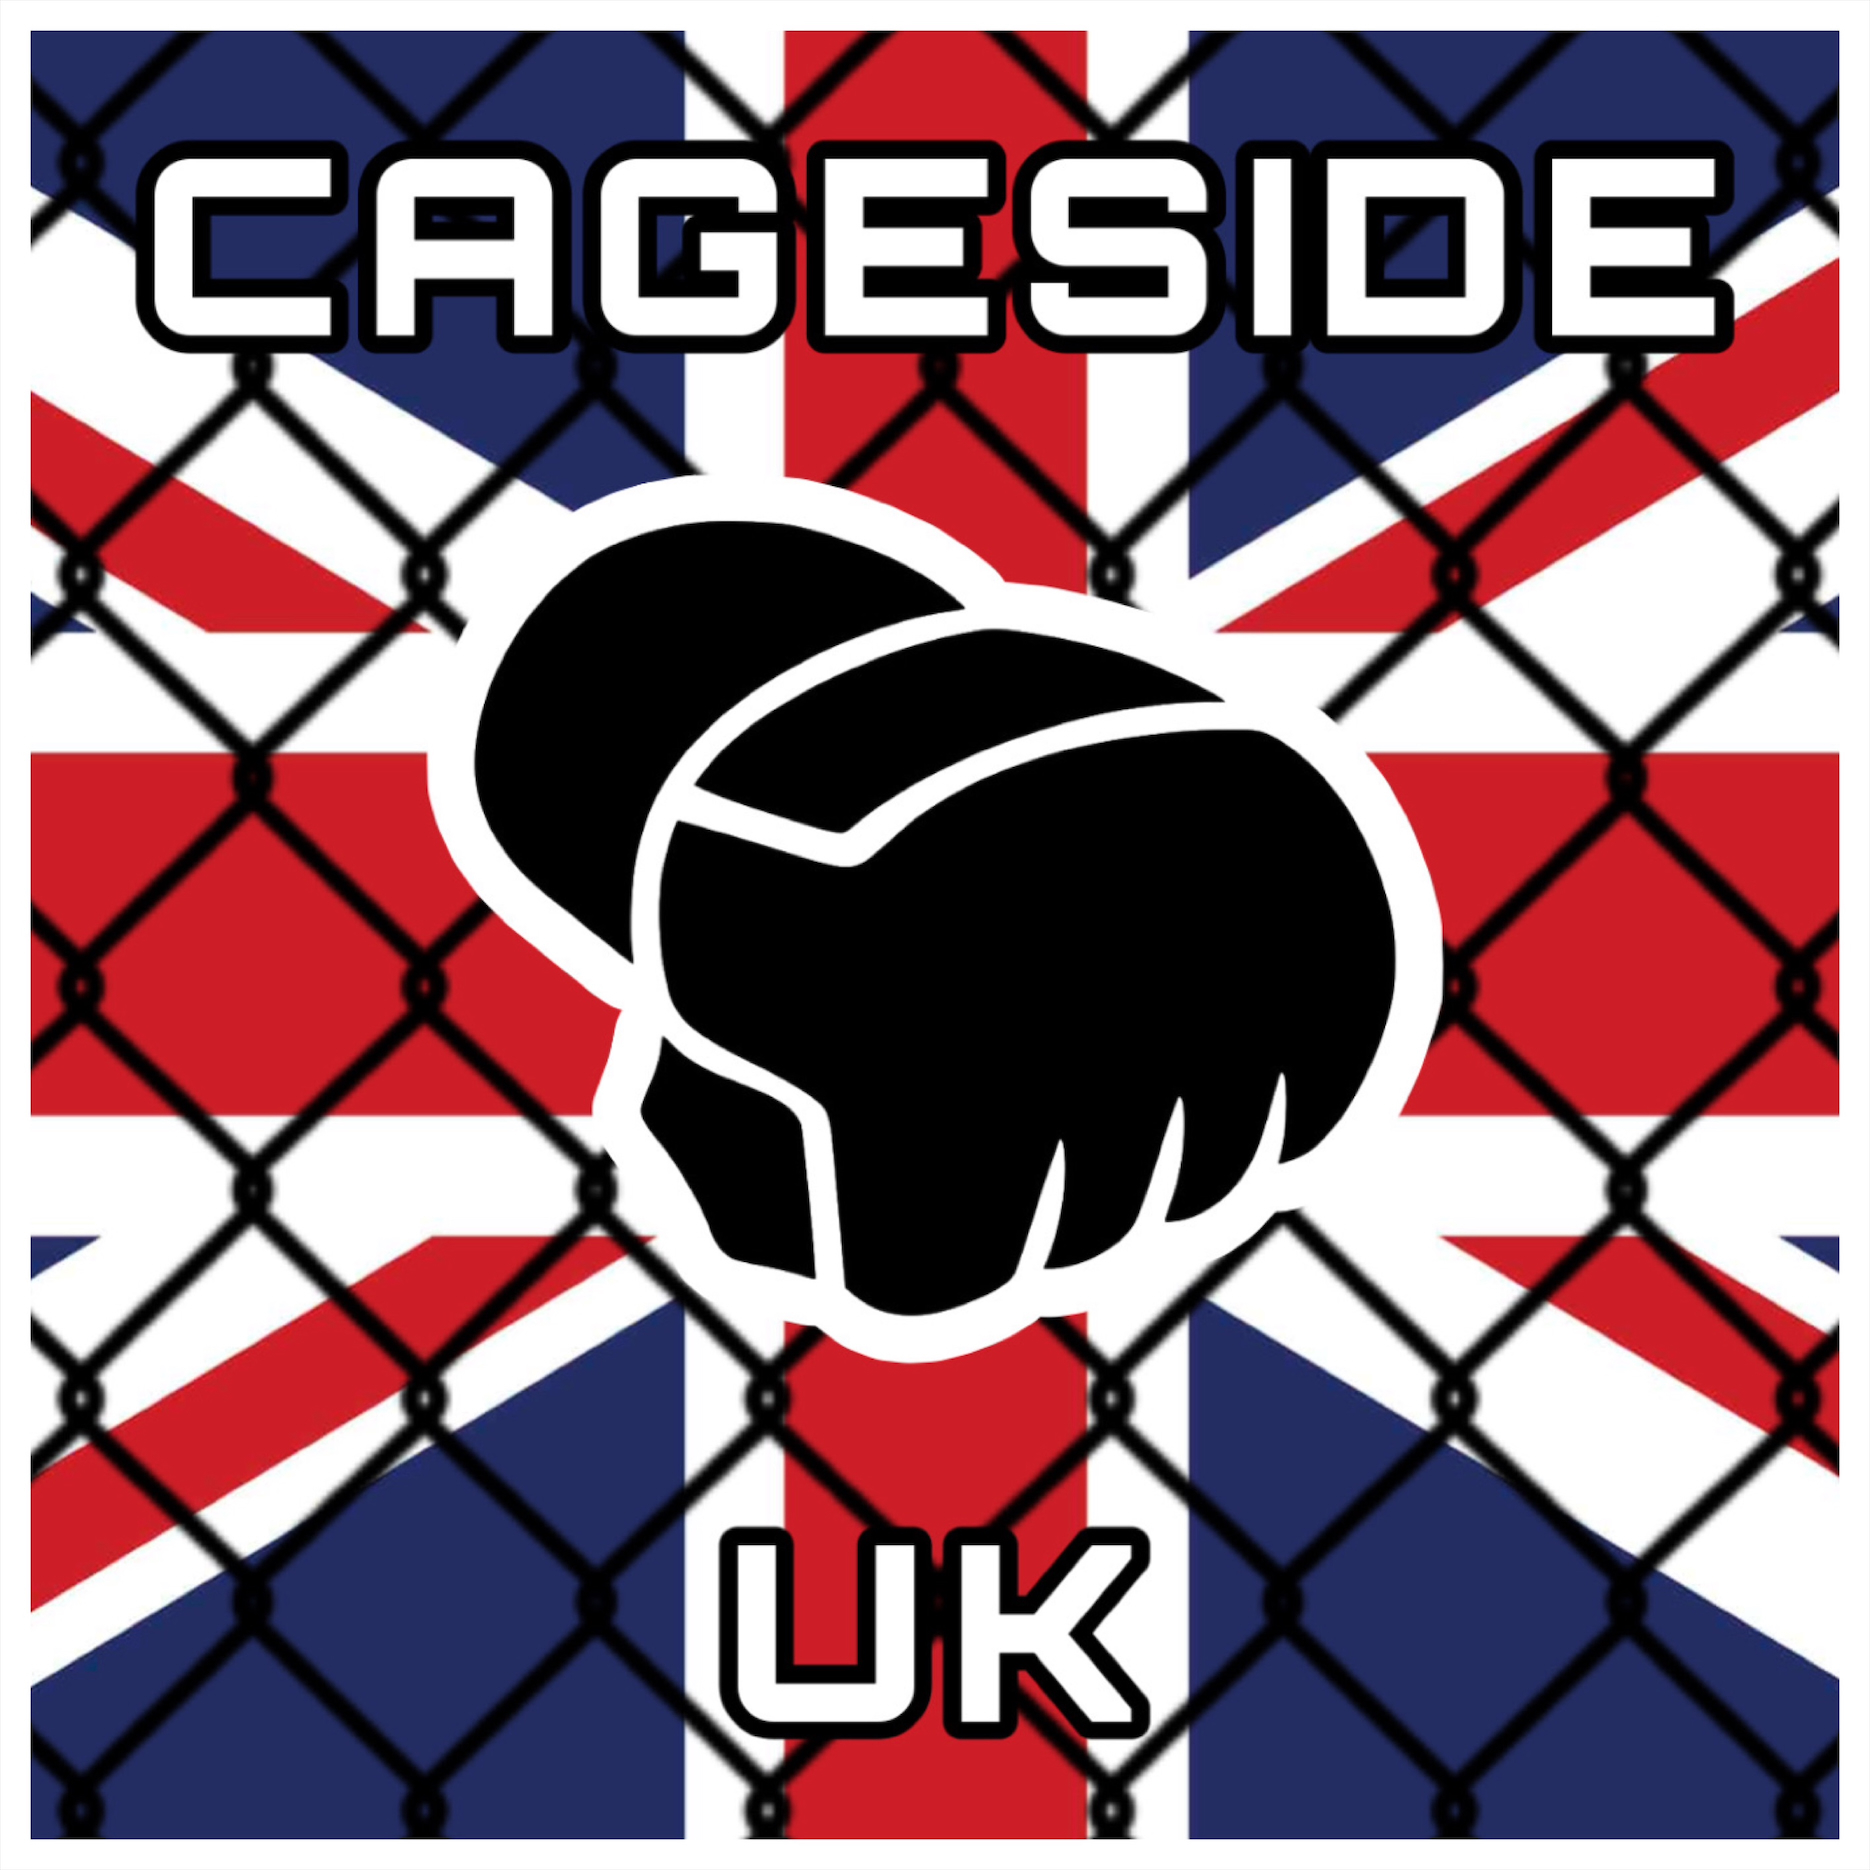 Show artwork for Cageside UK